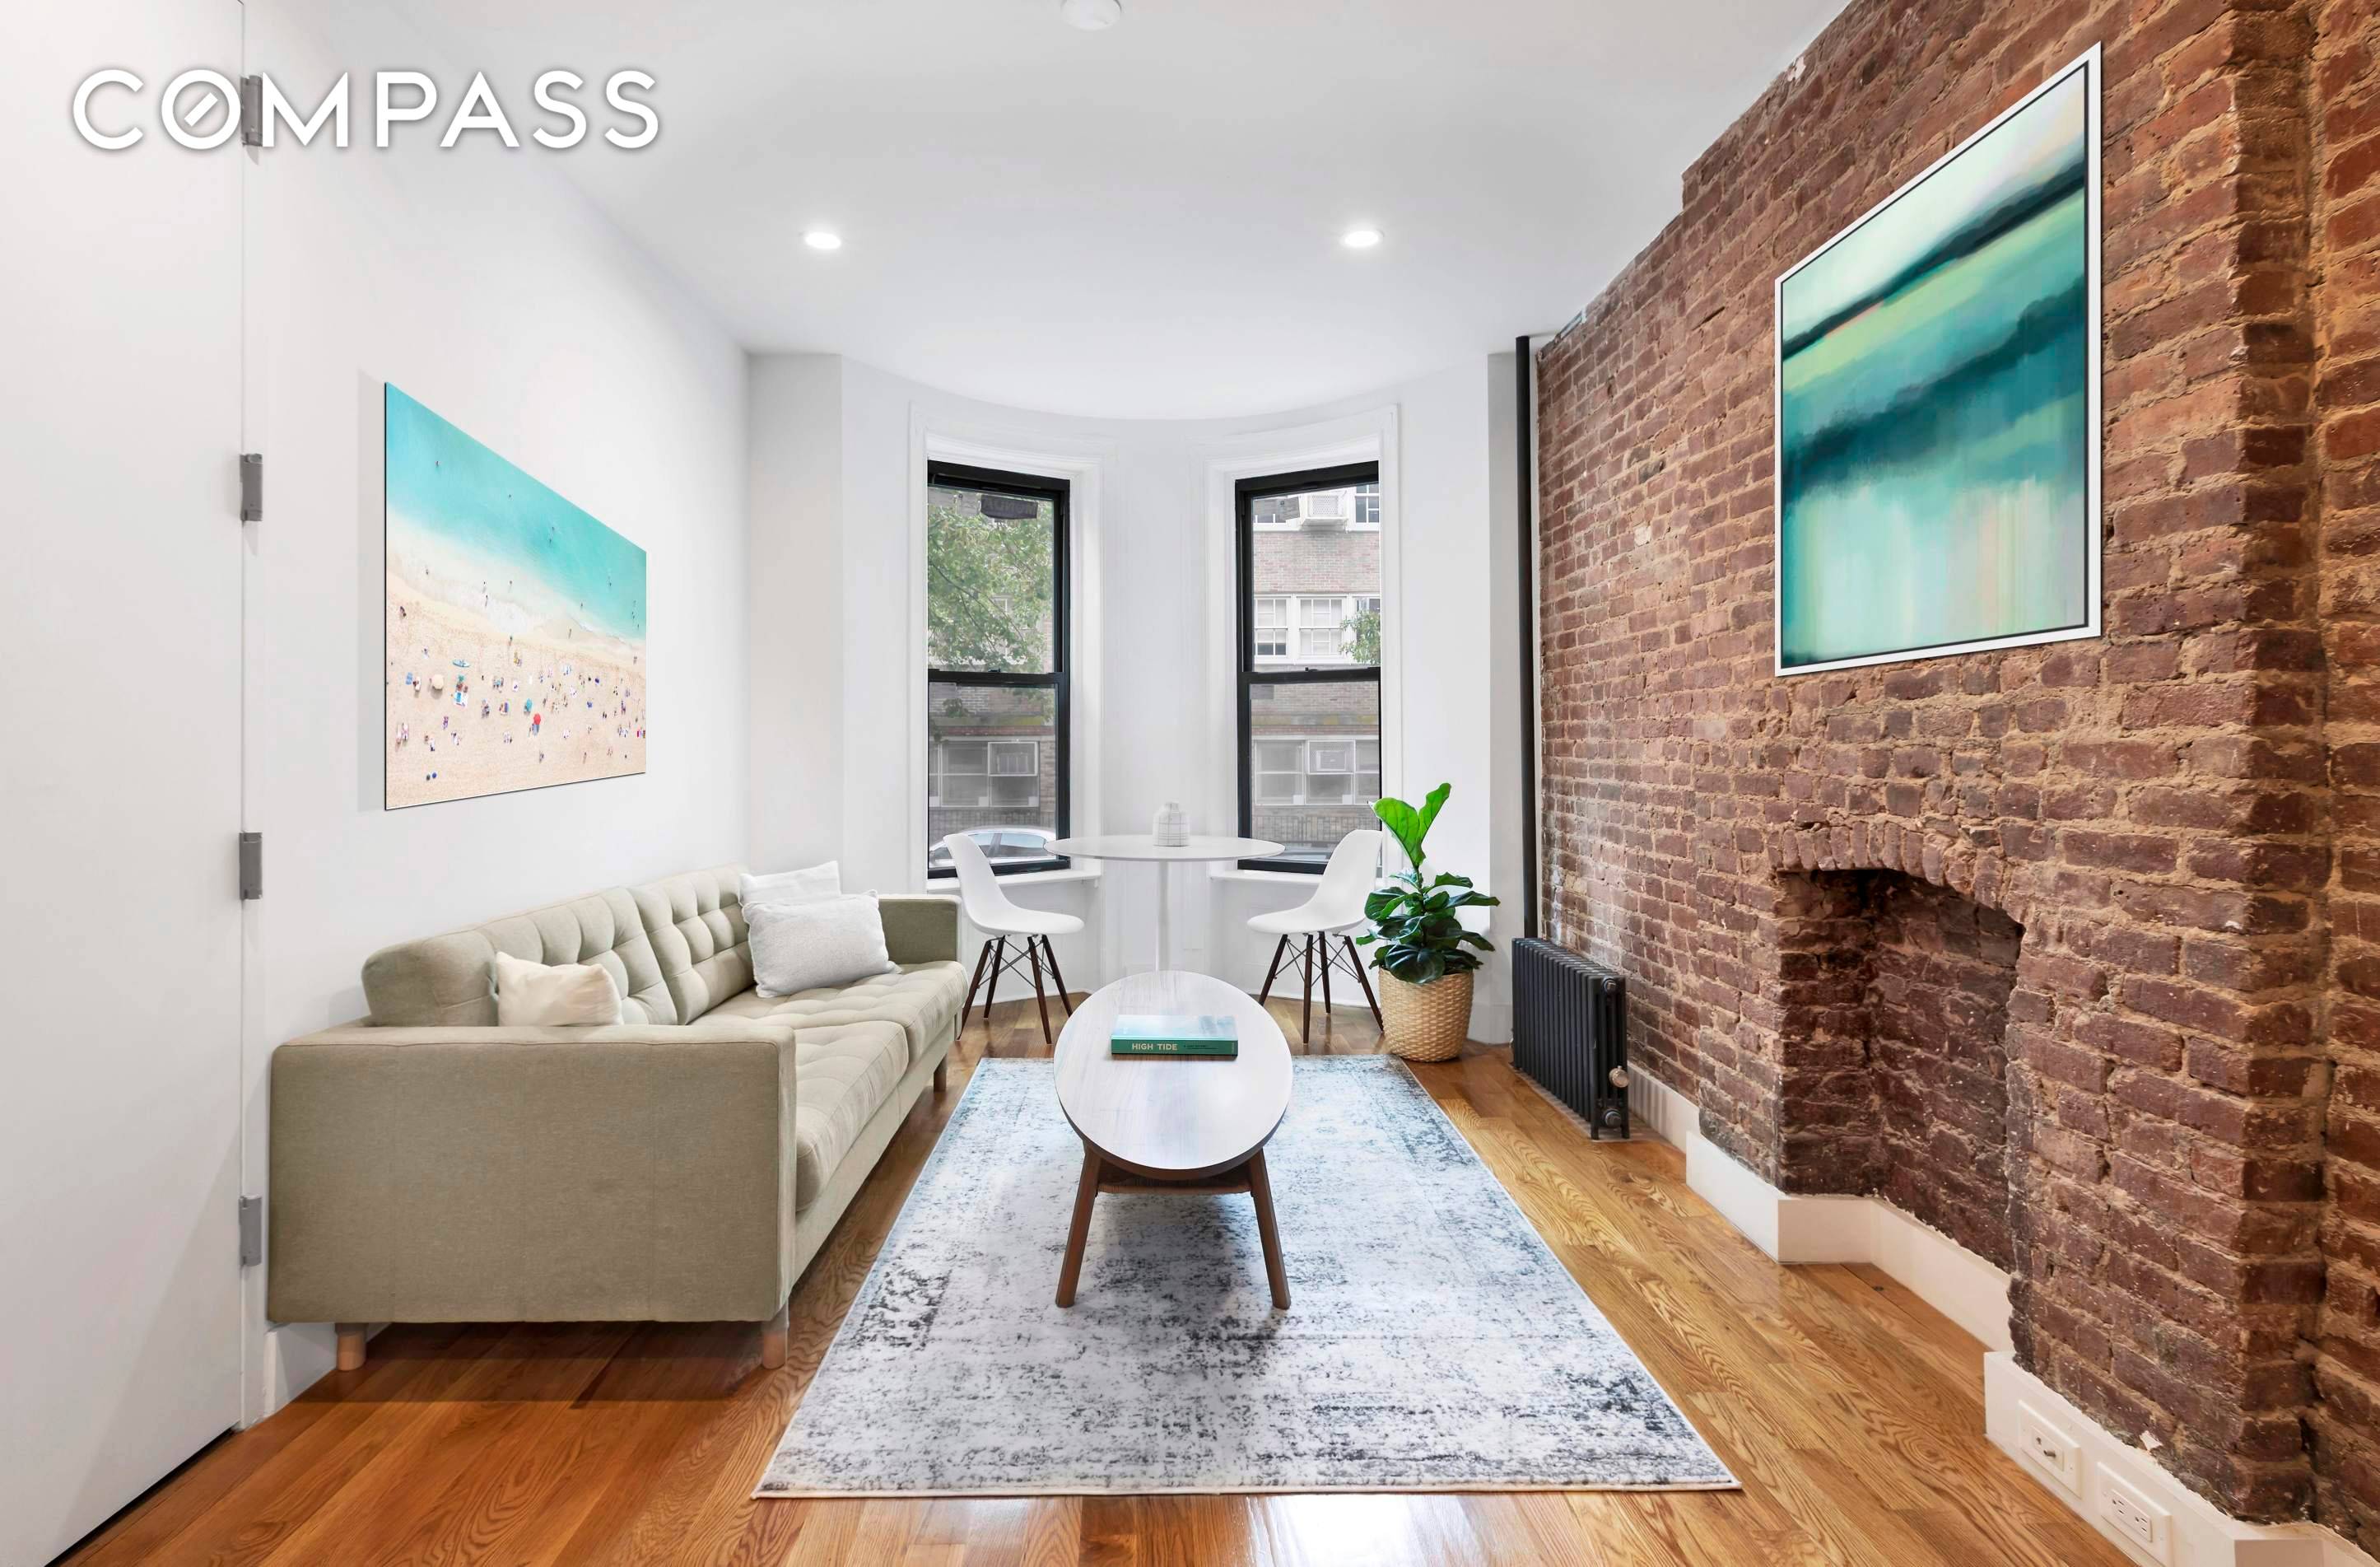 441 1st Street, located in the heart of Park Slope, is a classic pre war brownstone that has been fully reimagined and completely renovated for modern living.